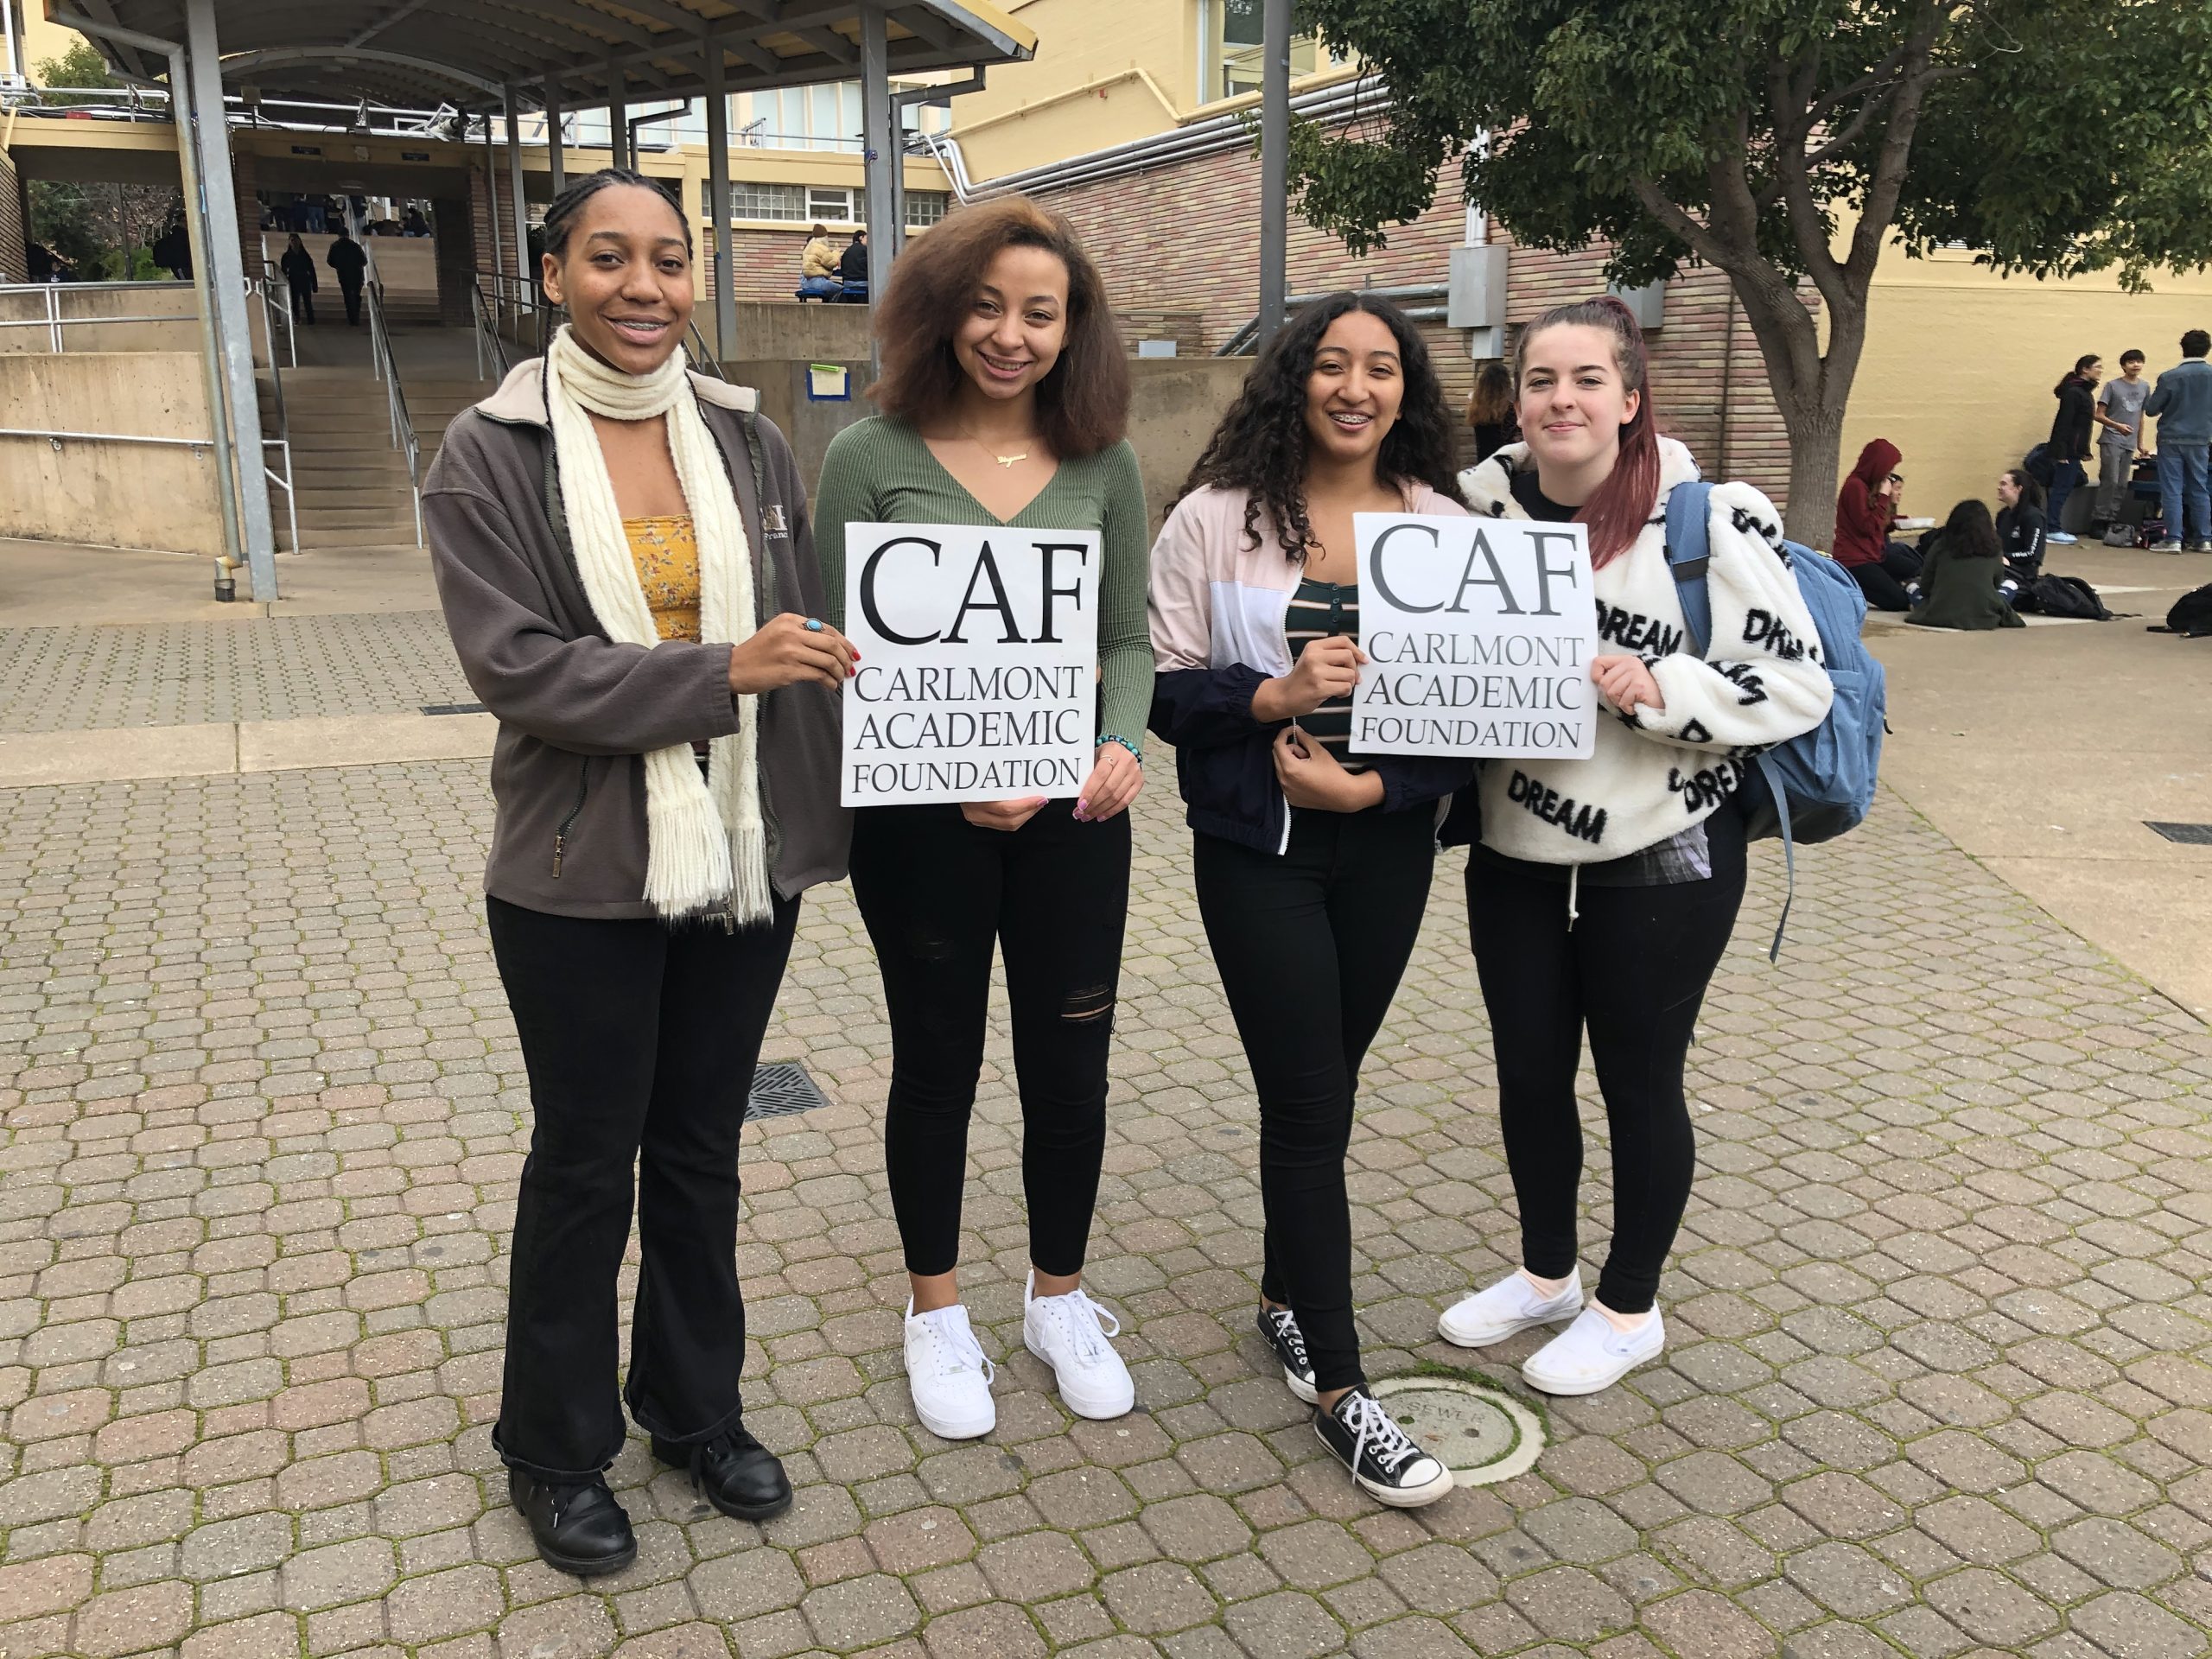 Four Carlmont students holding CAF signs